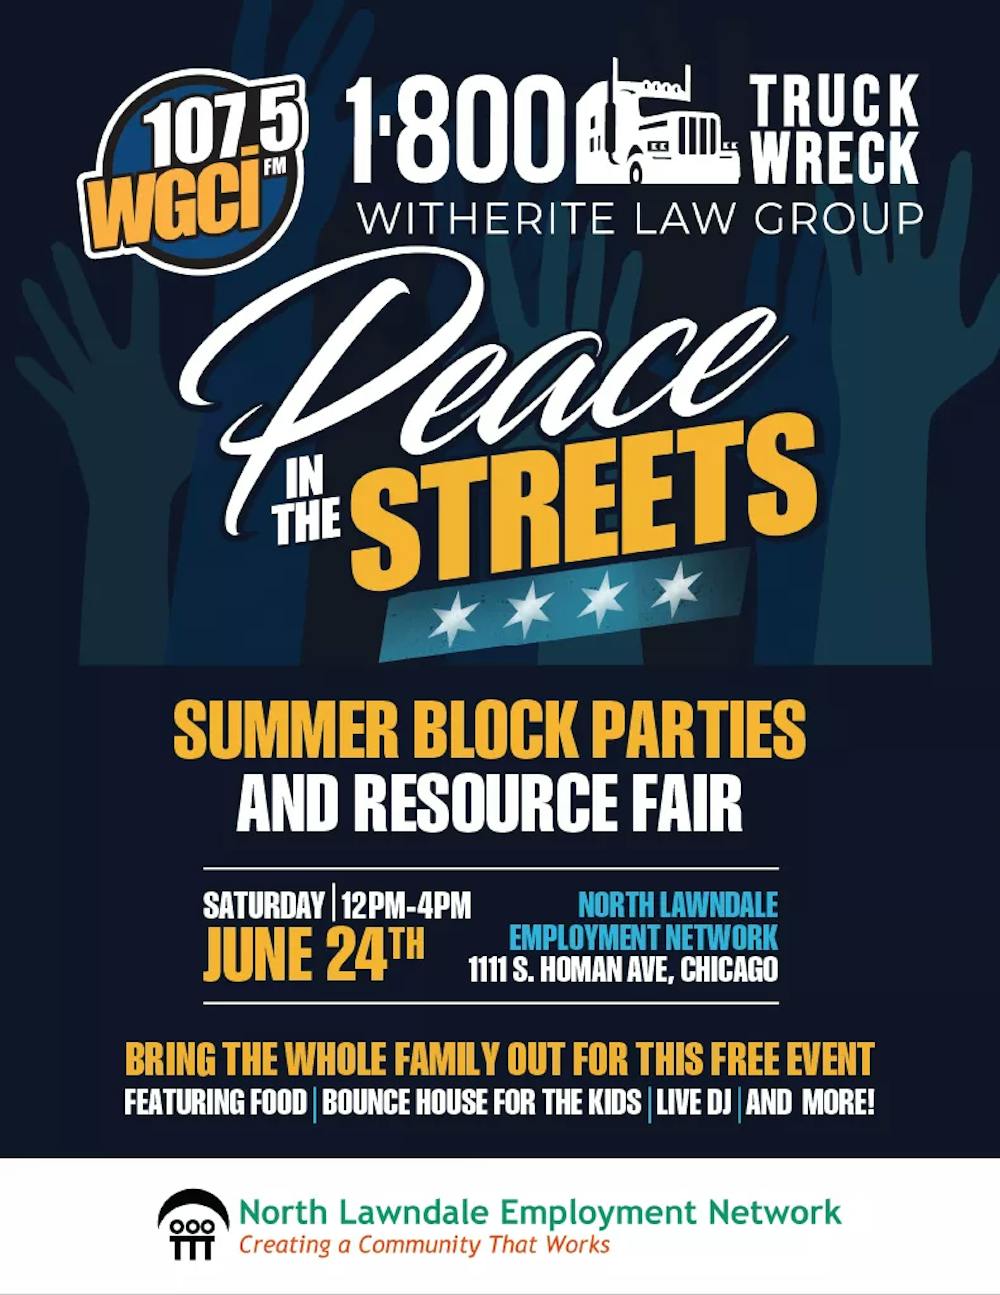 "Peace In The Streets" Summer Block Party & Community Resource Fair Comes to North Lawndale